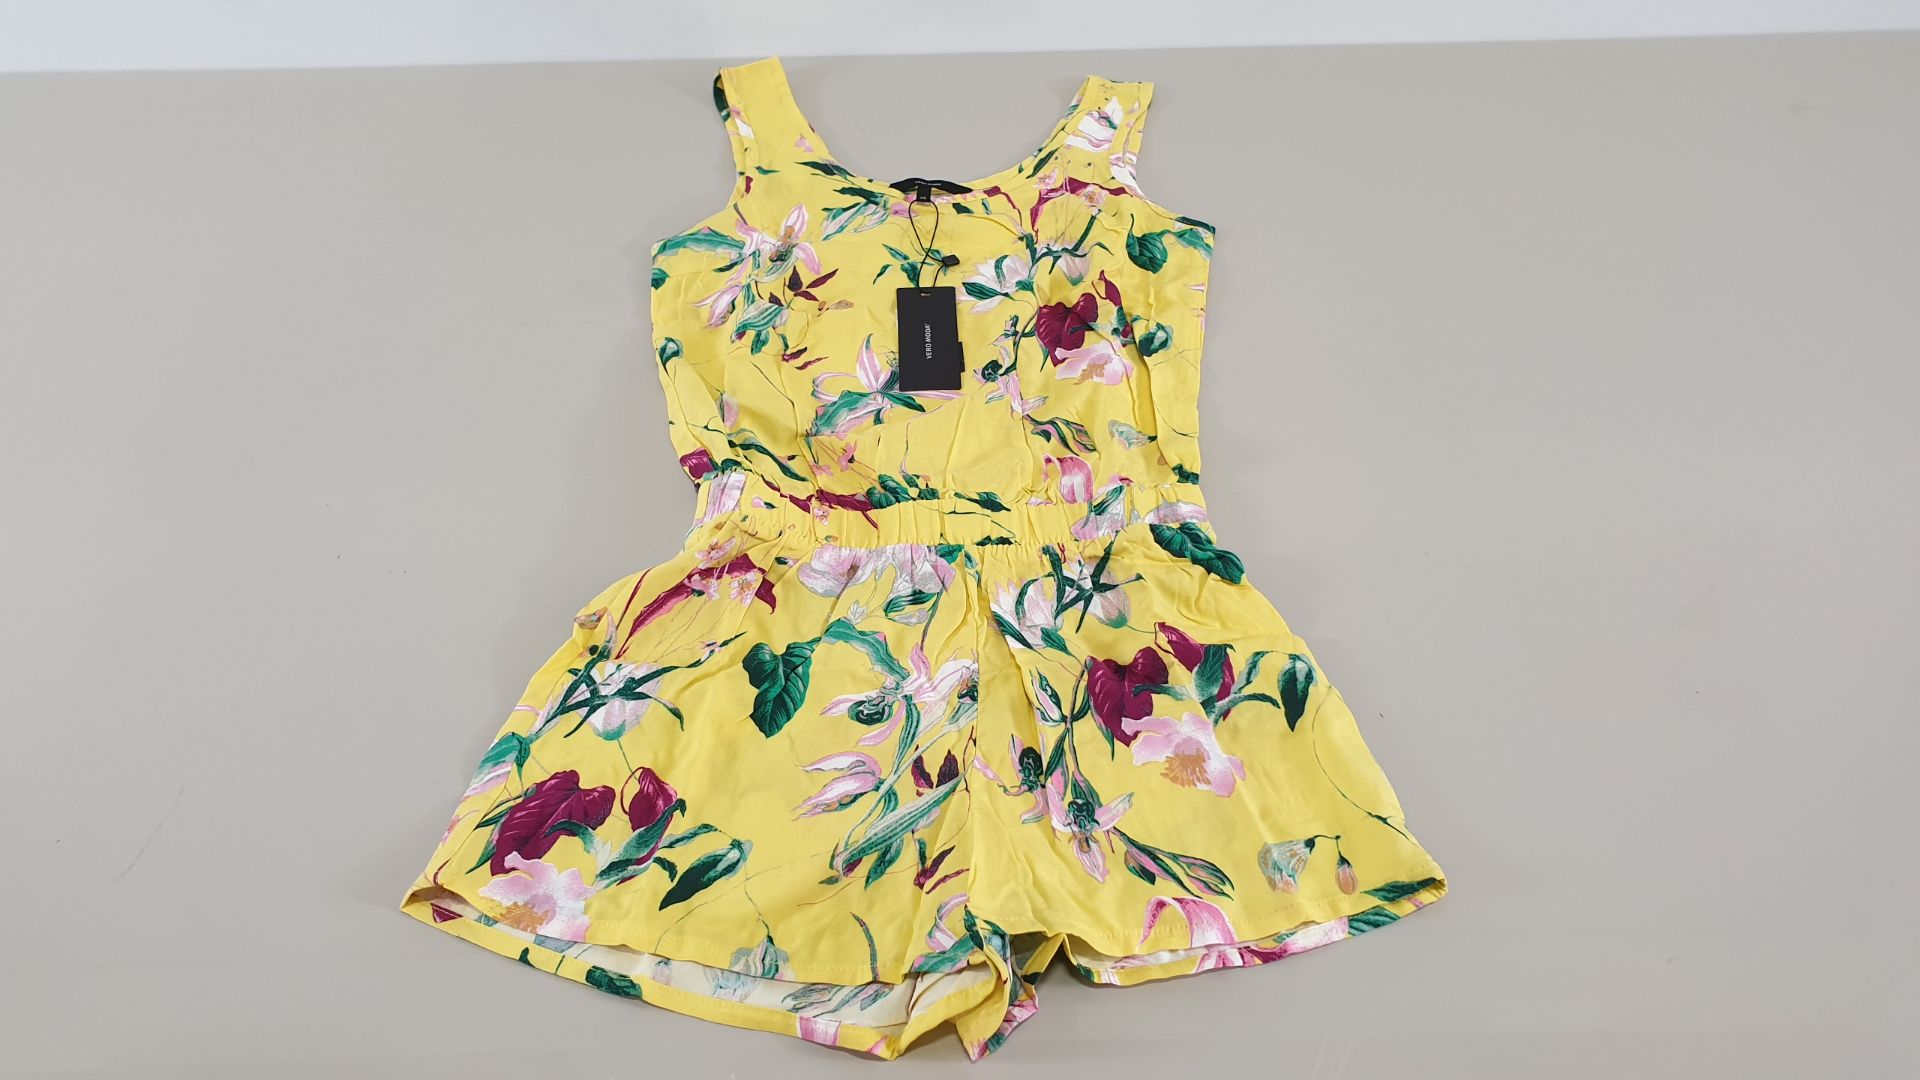 40 X BRAND NEW YELLOW FLORAL STYLED ALL IN ONE VERO MODA JUMP SUIT SIZE UK 12